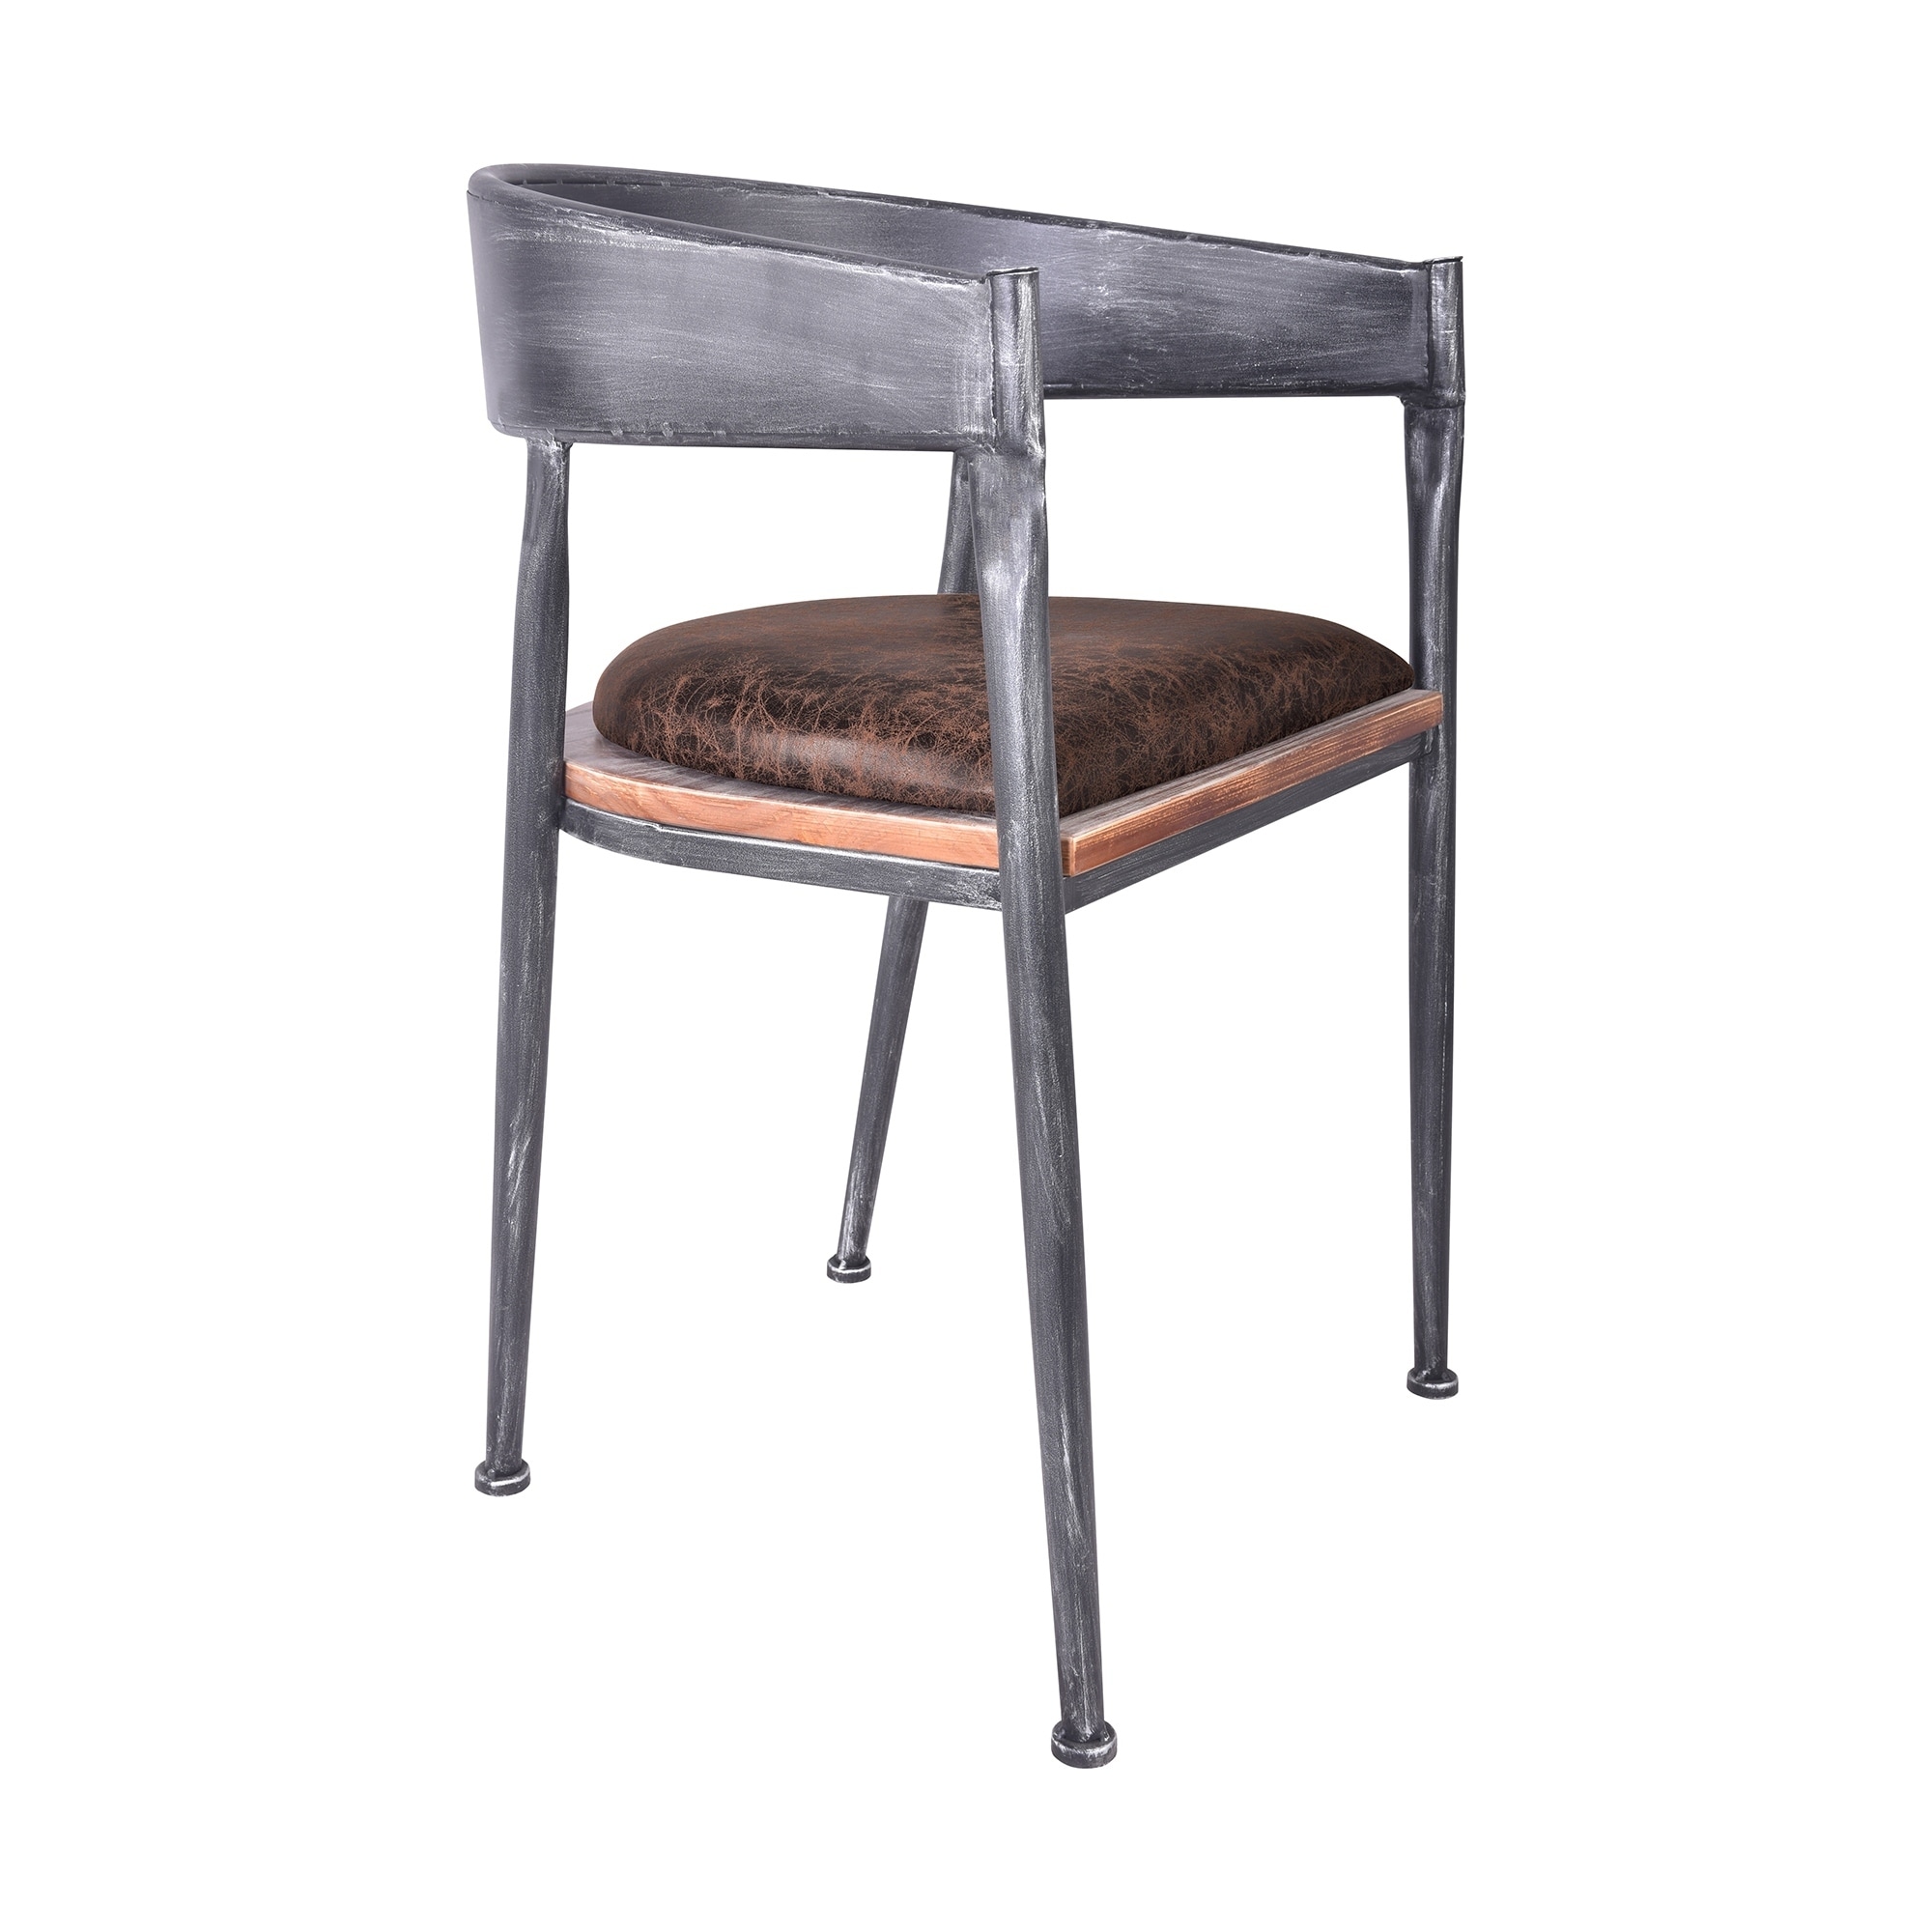 Featured image of post Industrial Wood And Metal Dining Chairs : The natural distressed ash finish of the seat hardwood showcases beautiful wood grain details.